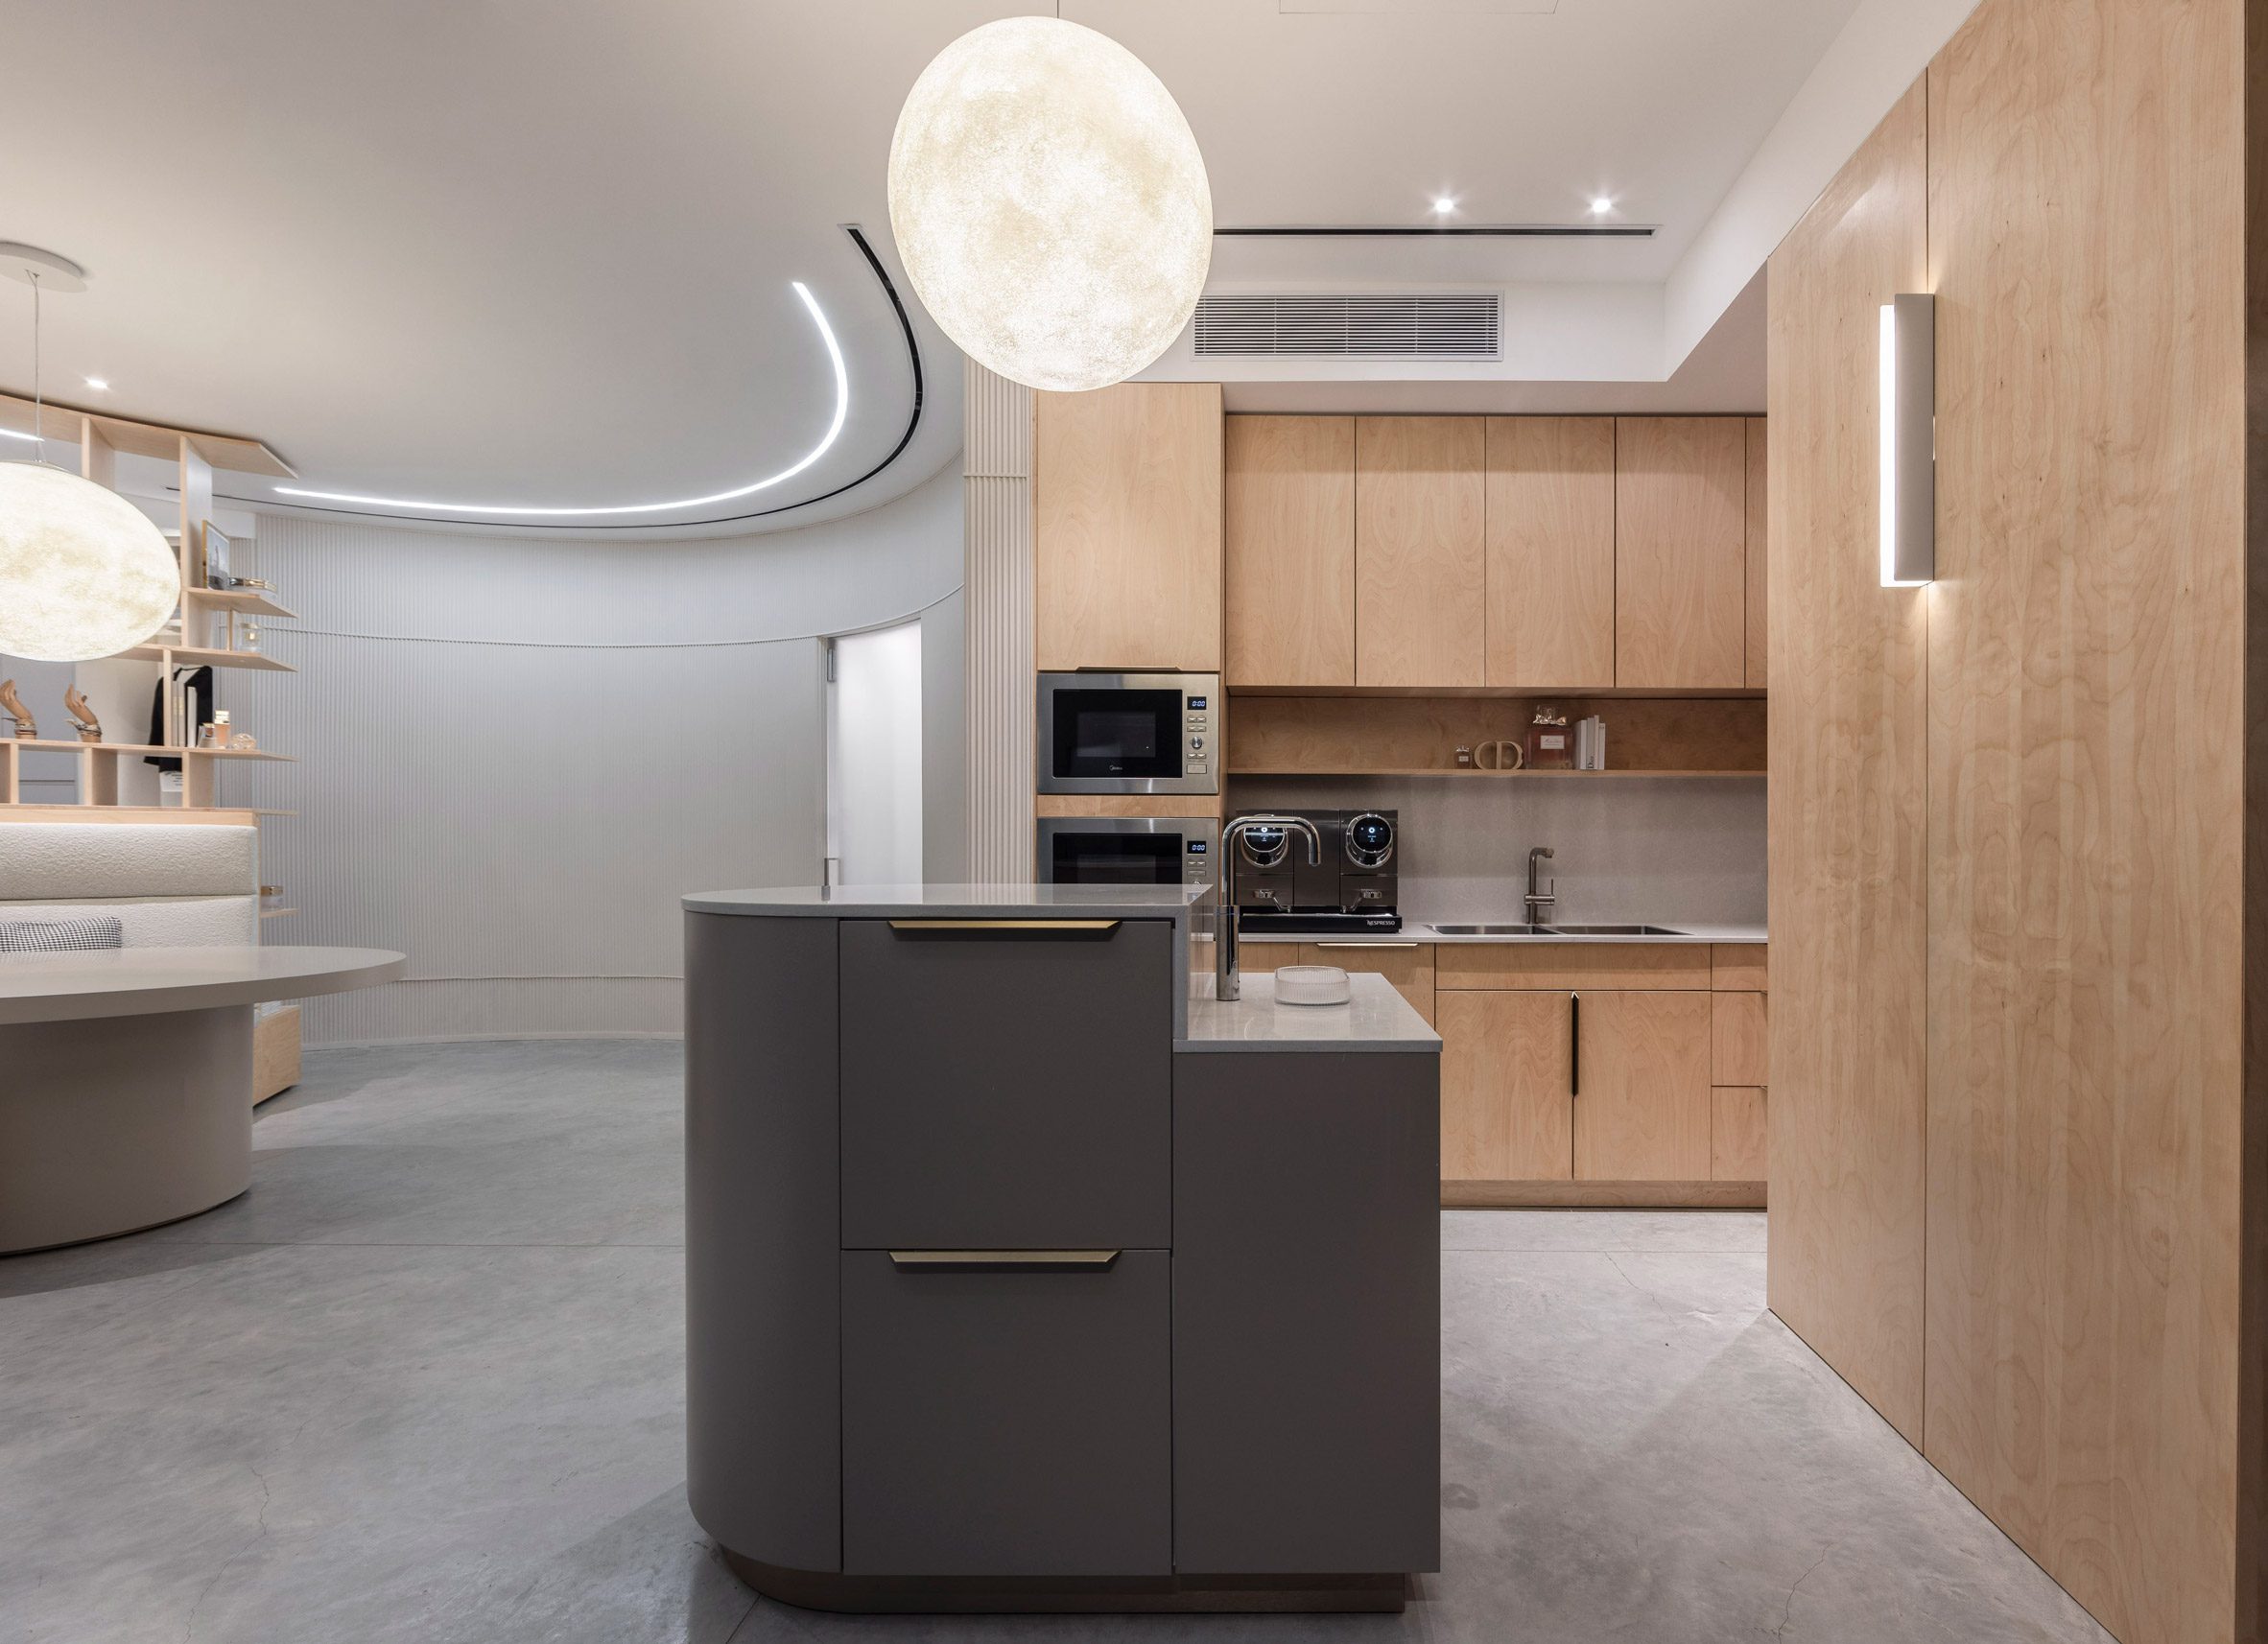 The interior of Dior's office kitchen 